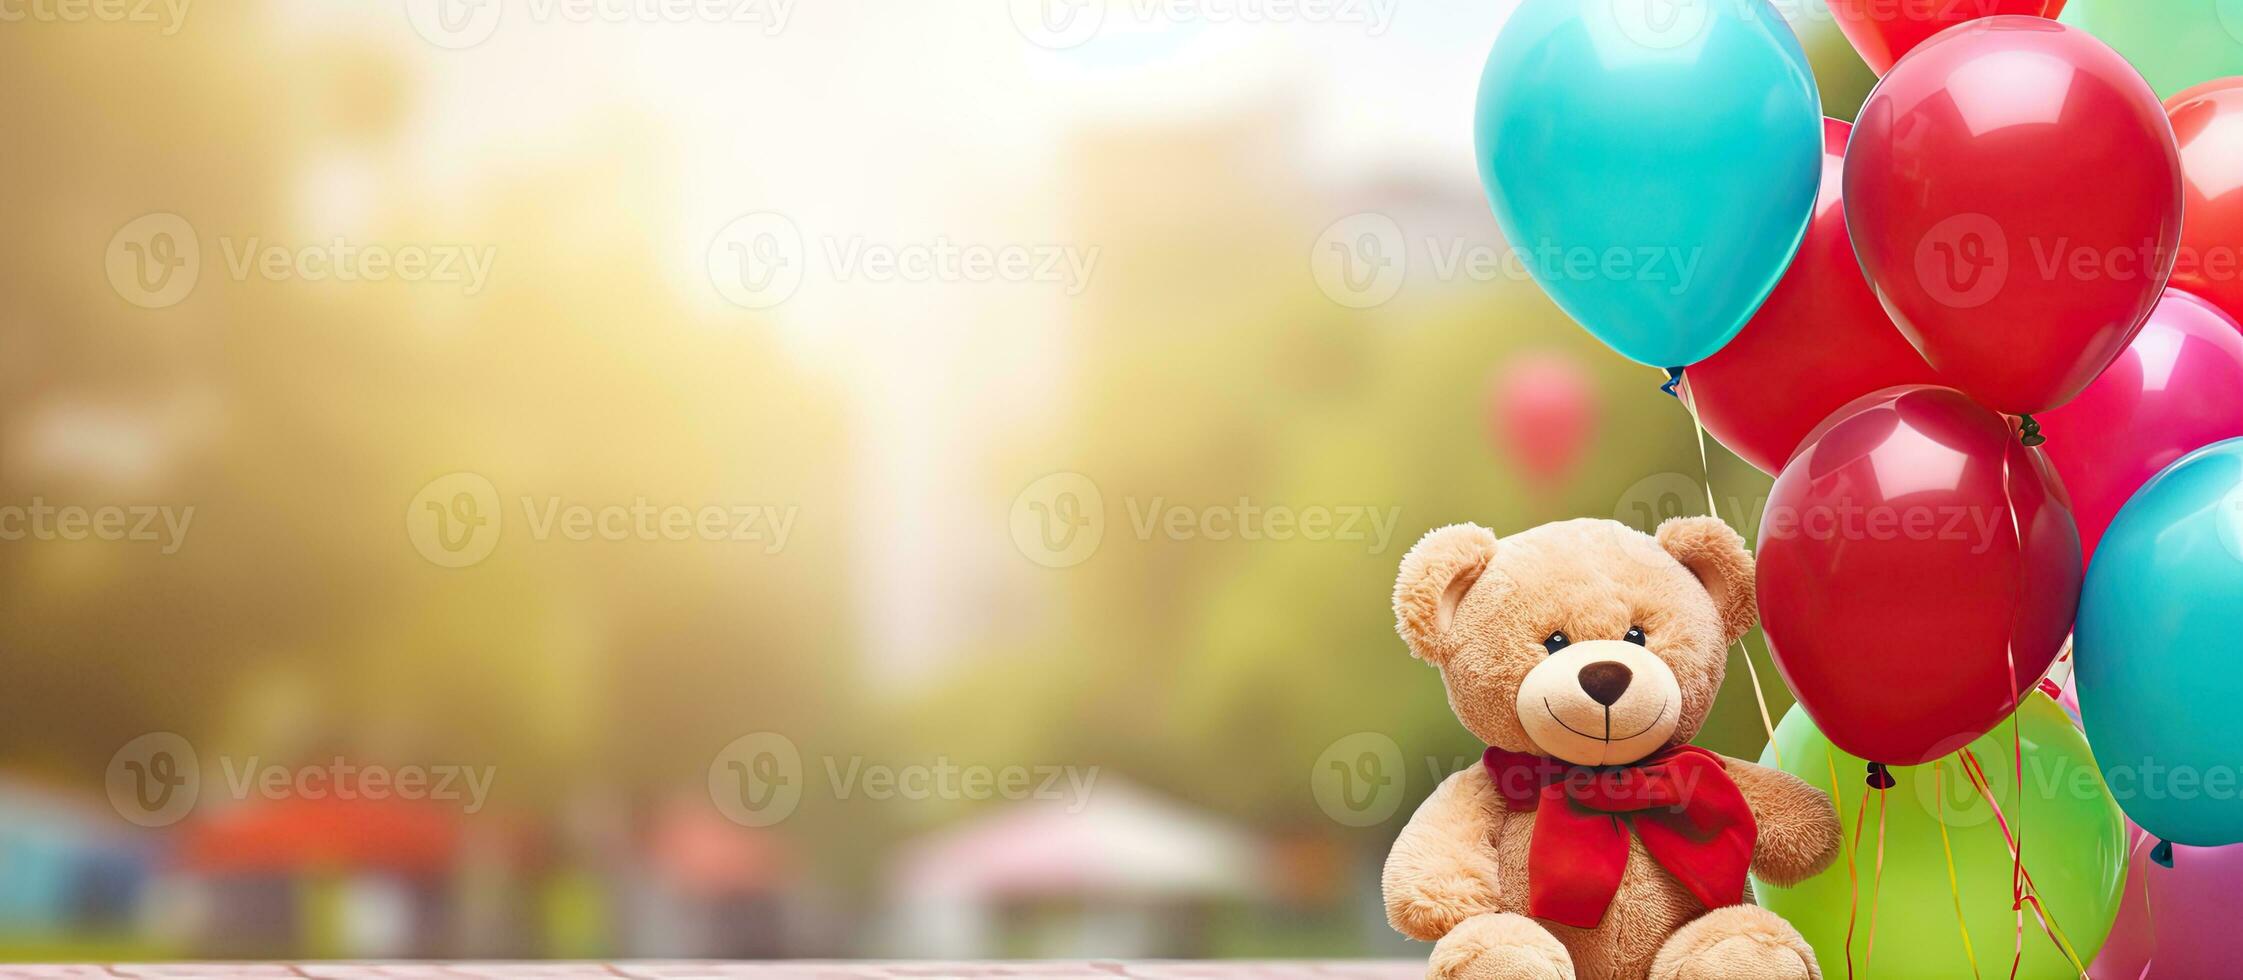 Little girl with autism happily playing with her best friend a teddy bear while holding colorful helium balloons in a green park playground with copy s photo